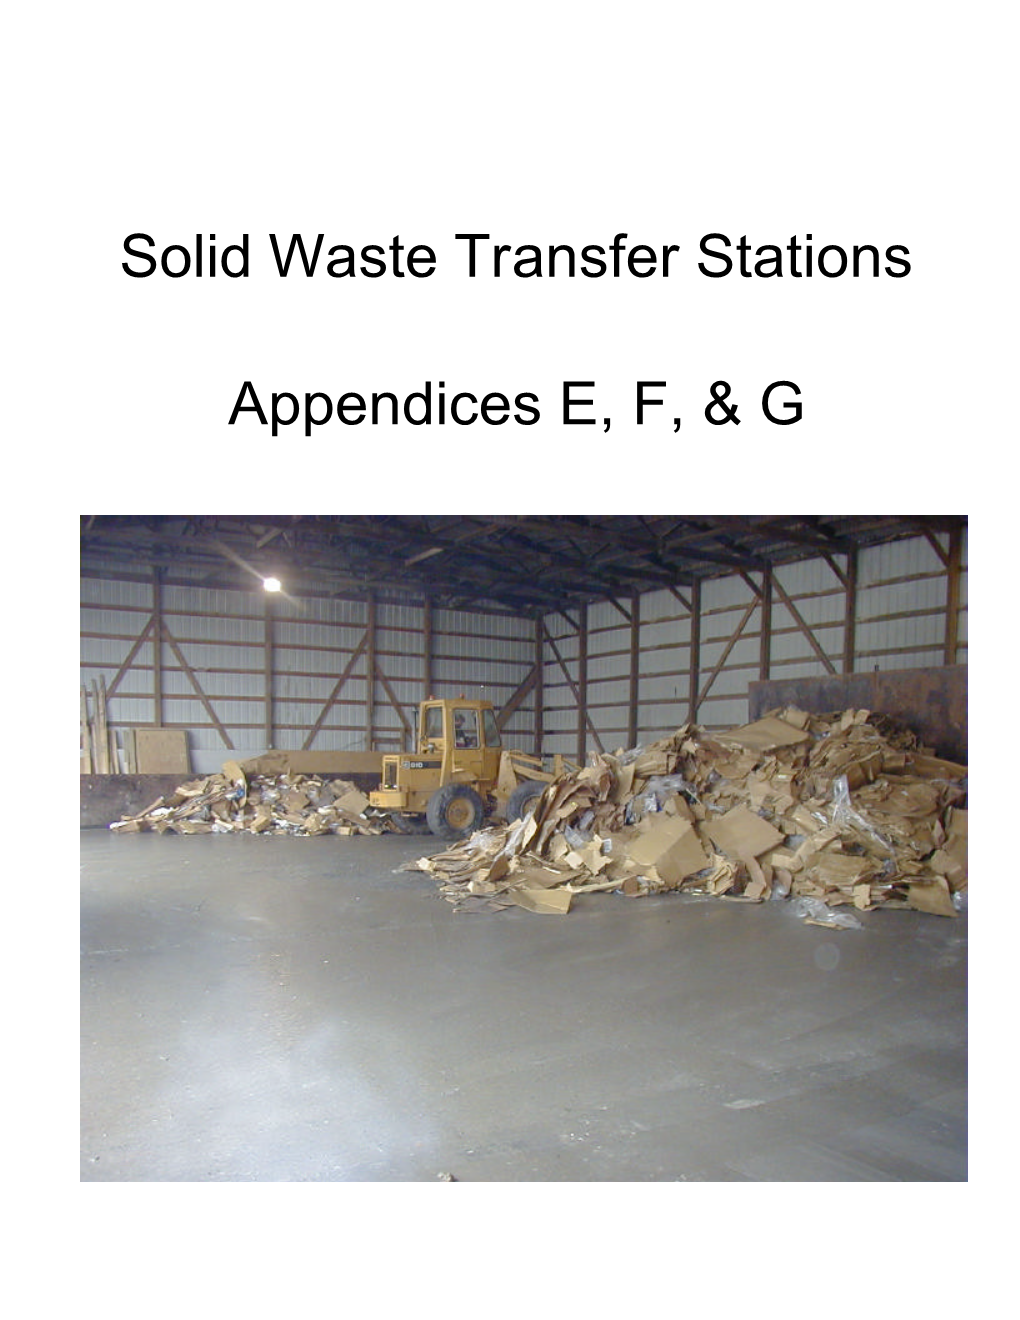 Solid Waste Transfer Stations Appendices E, F, & G